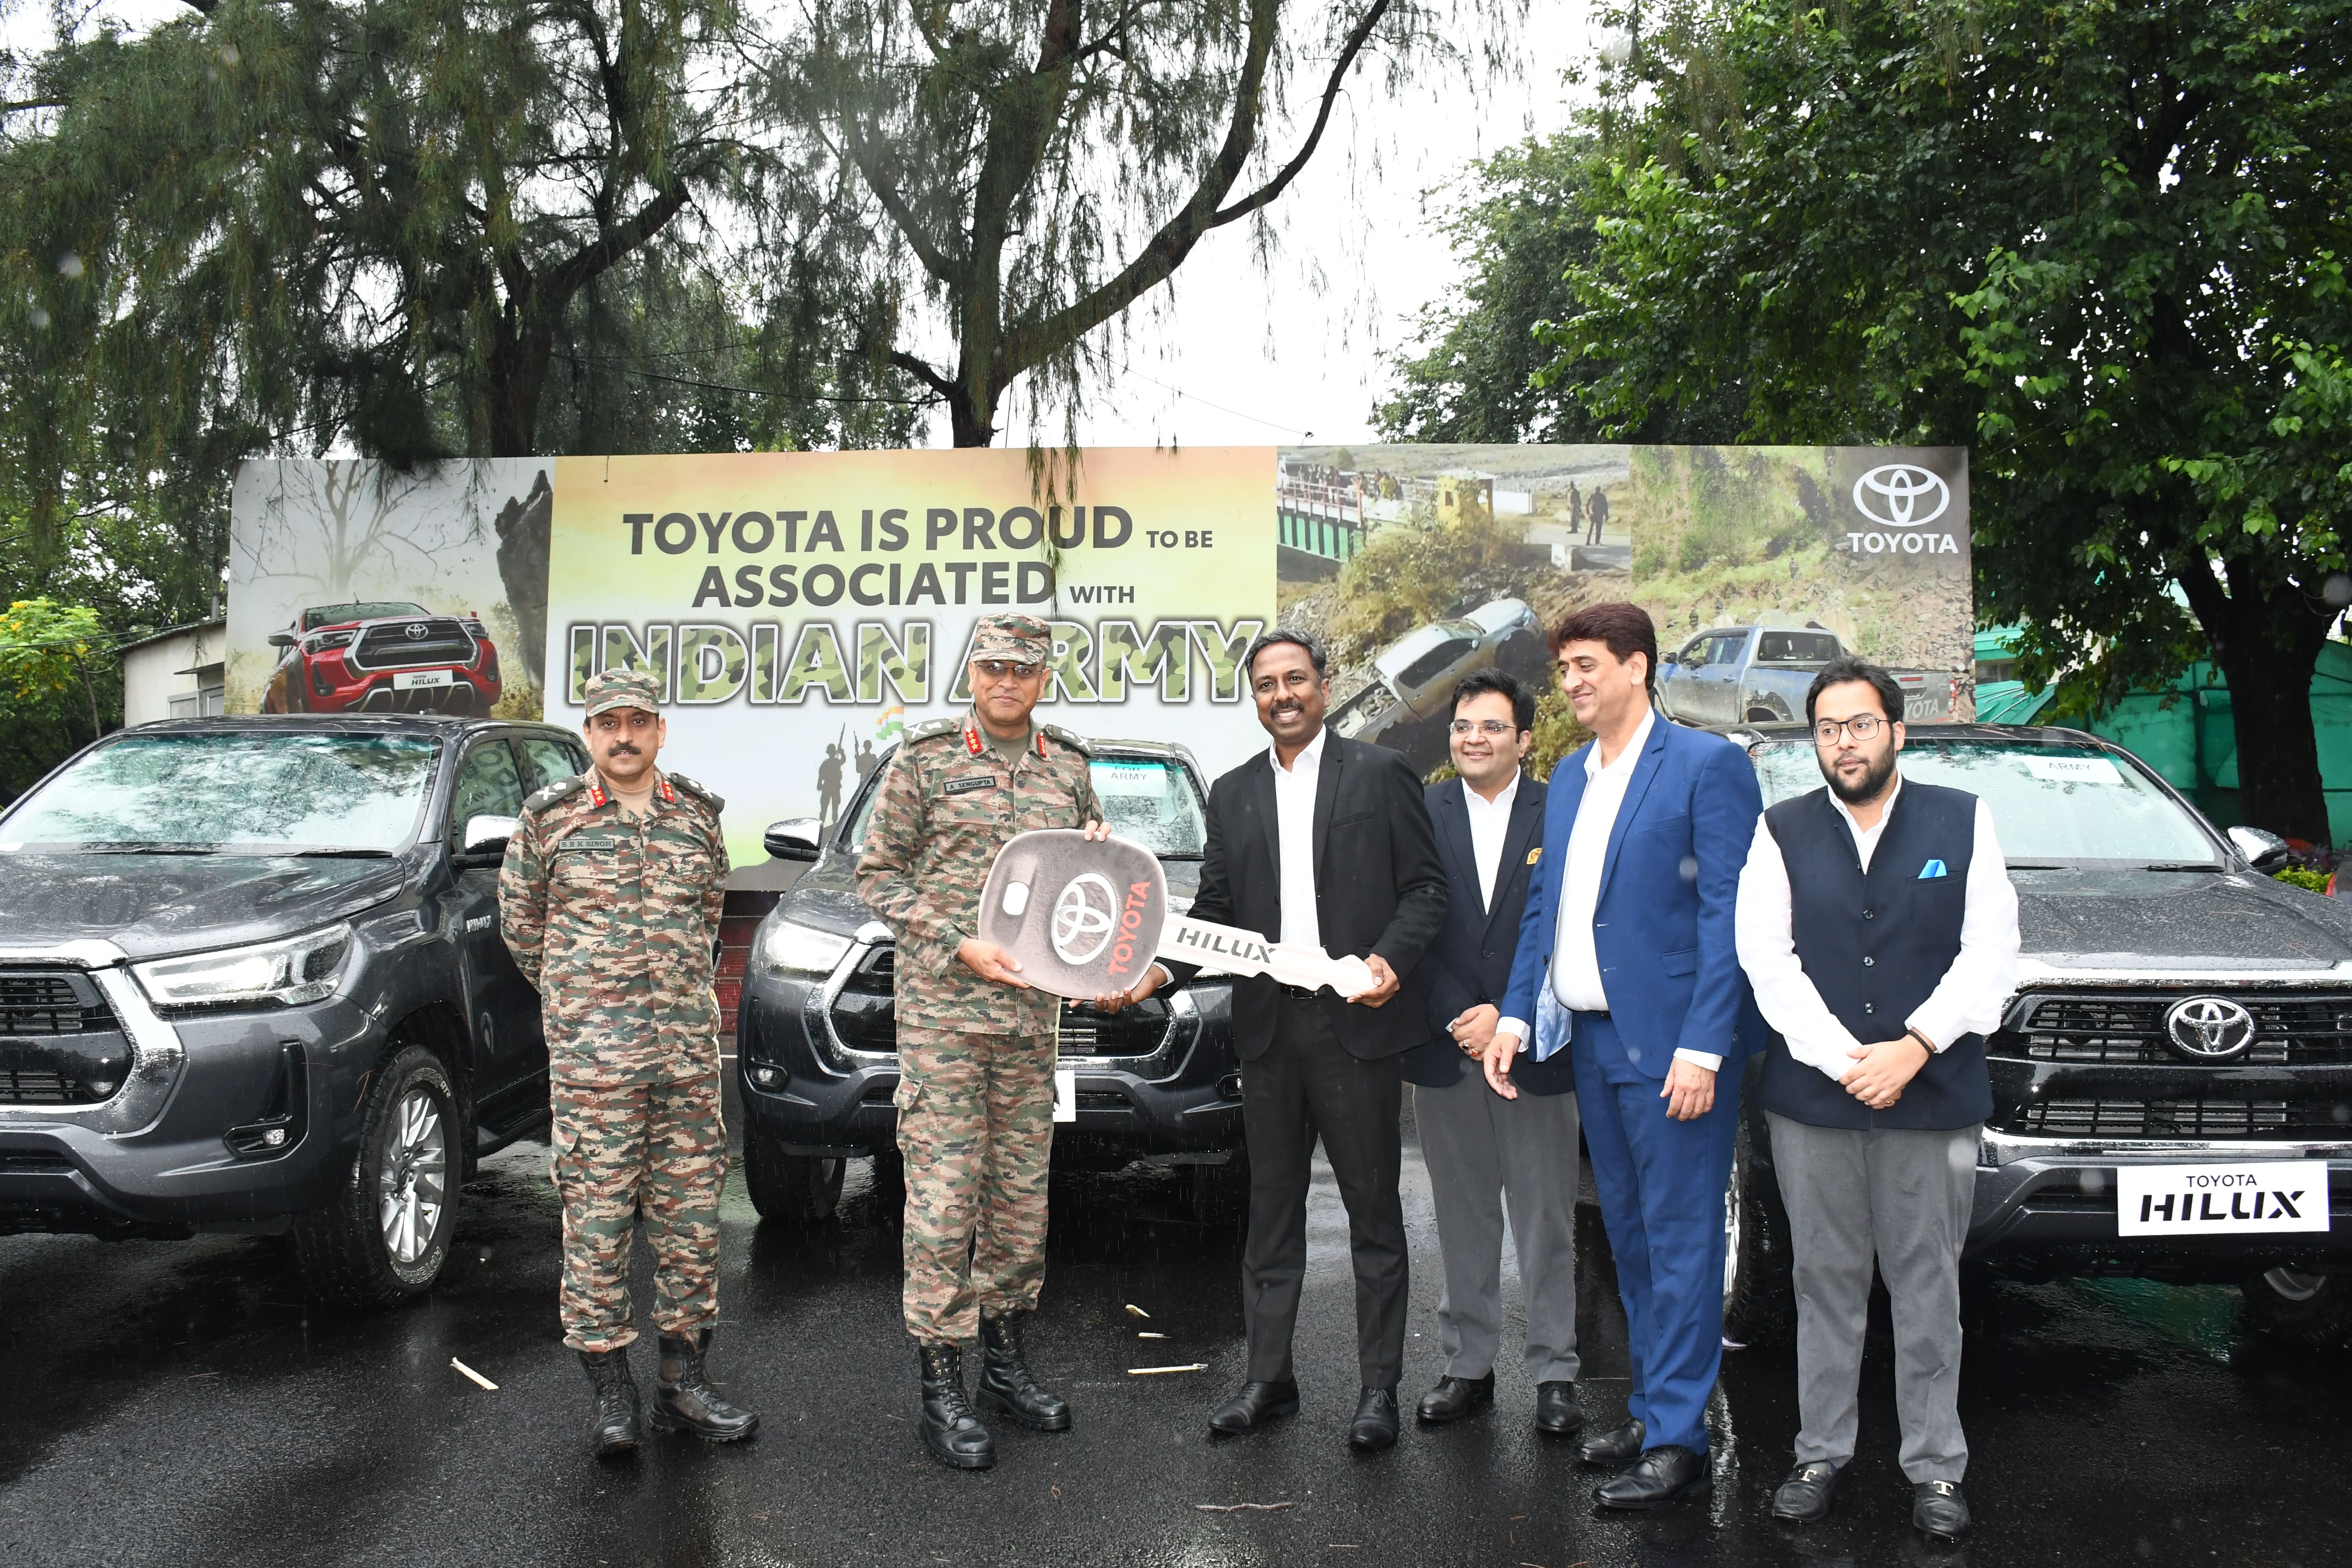 Toyota Kirloskar Motors delivers a fleet of the Iconic Hilux to the Indian Army